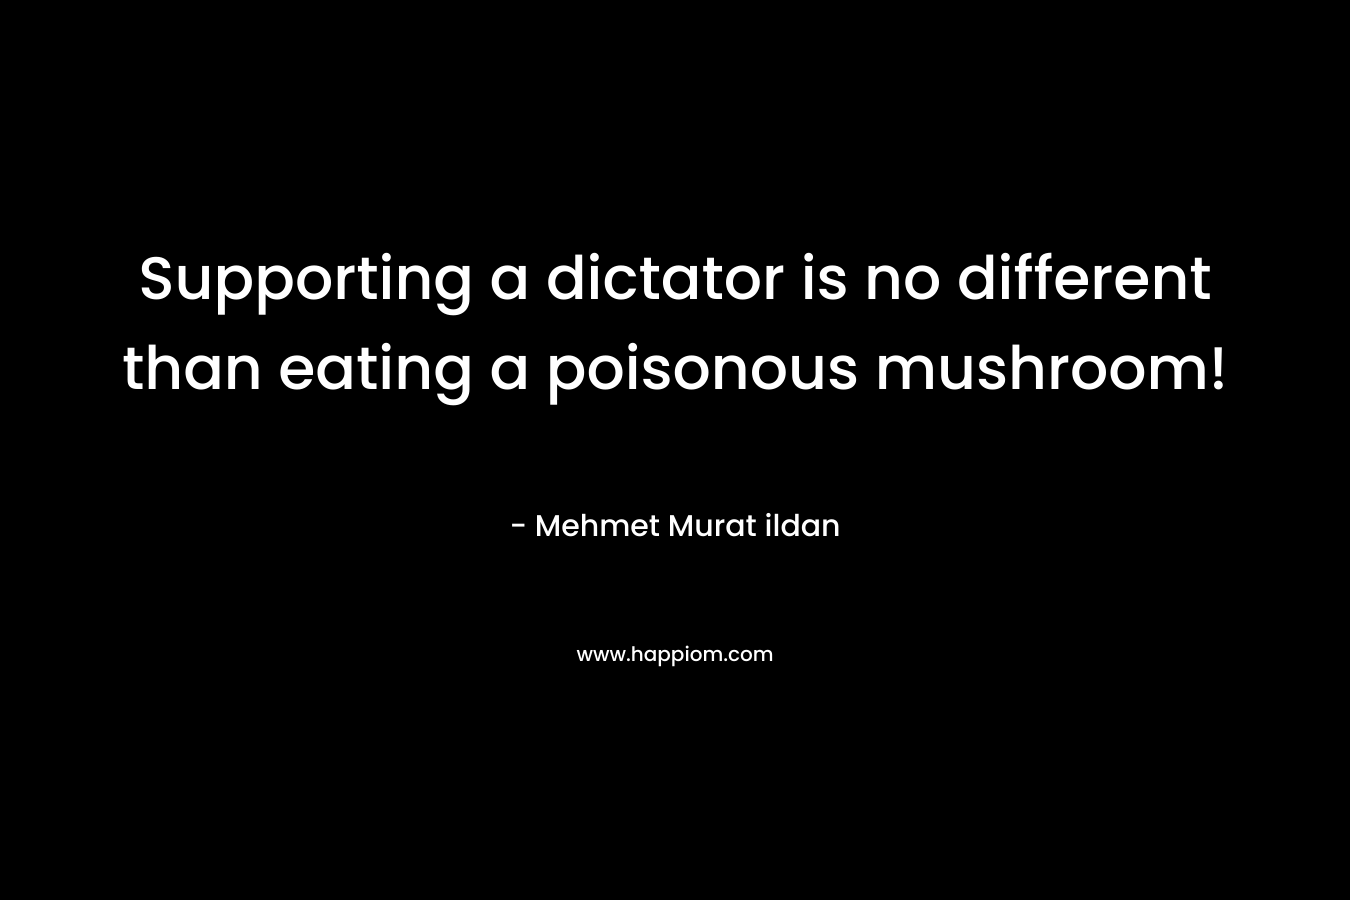 Supporting a dictator is no different than eating a poisonous mushroom!